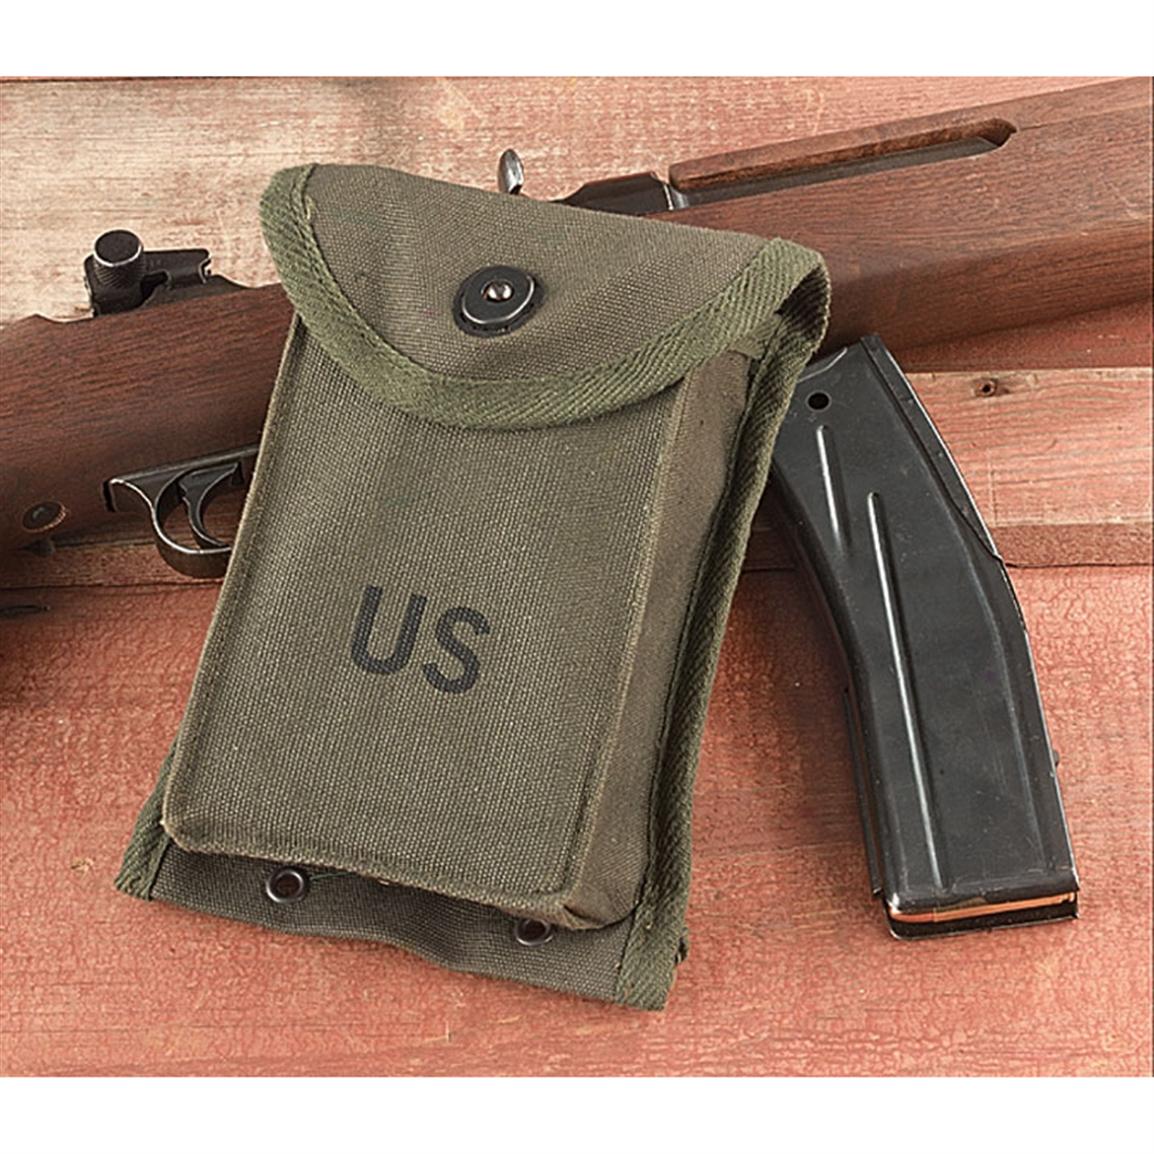 M1 Carbine Ammo Pouch Install